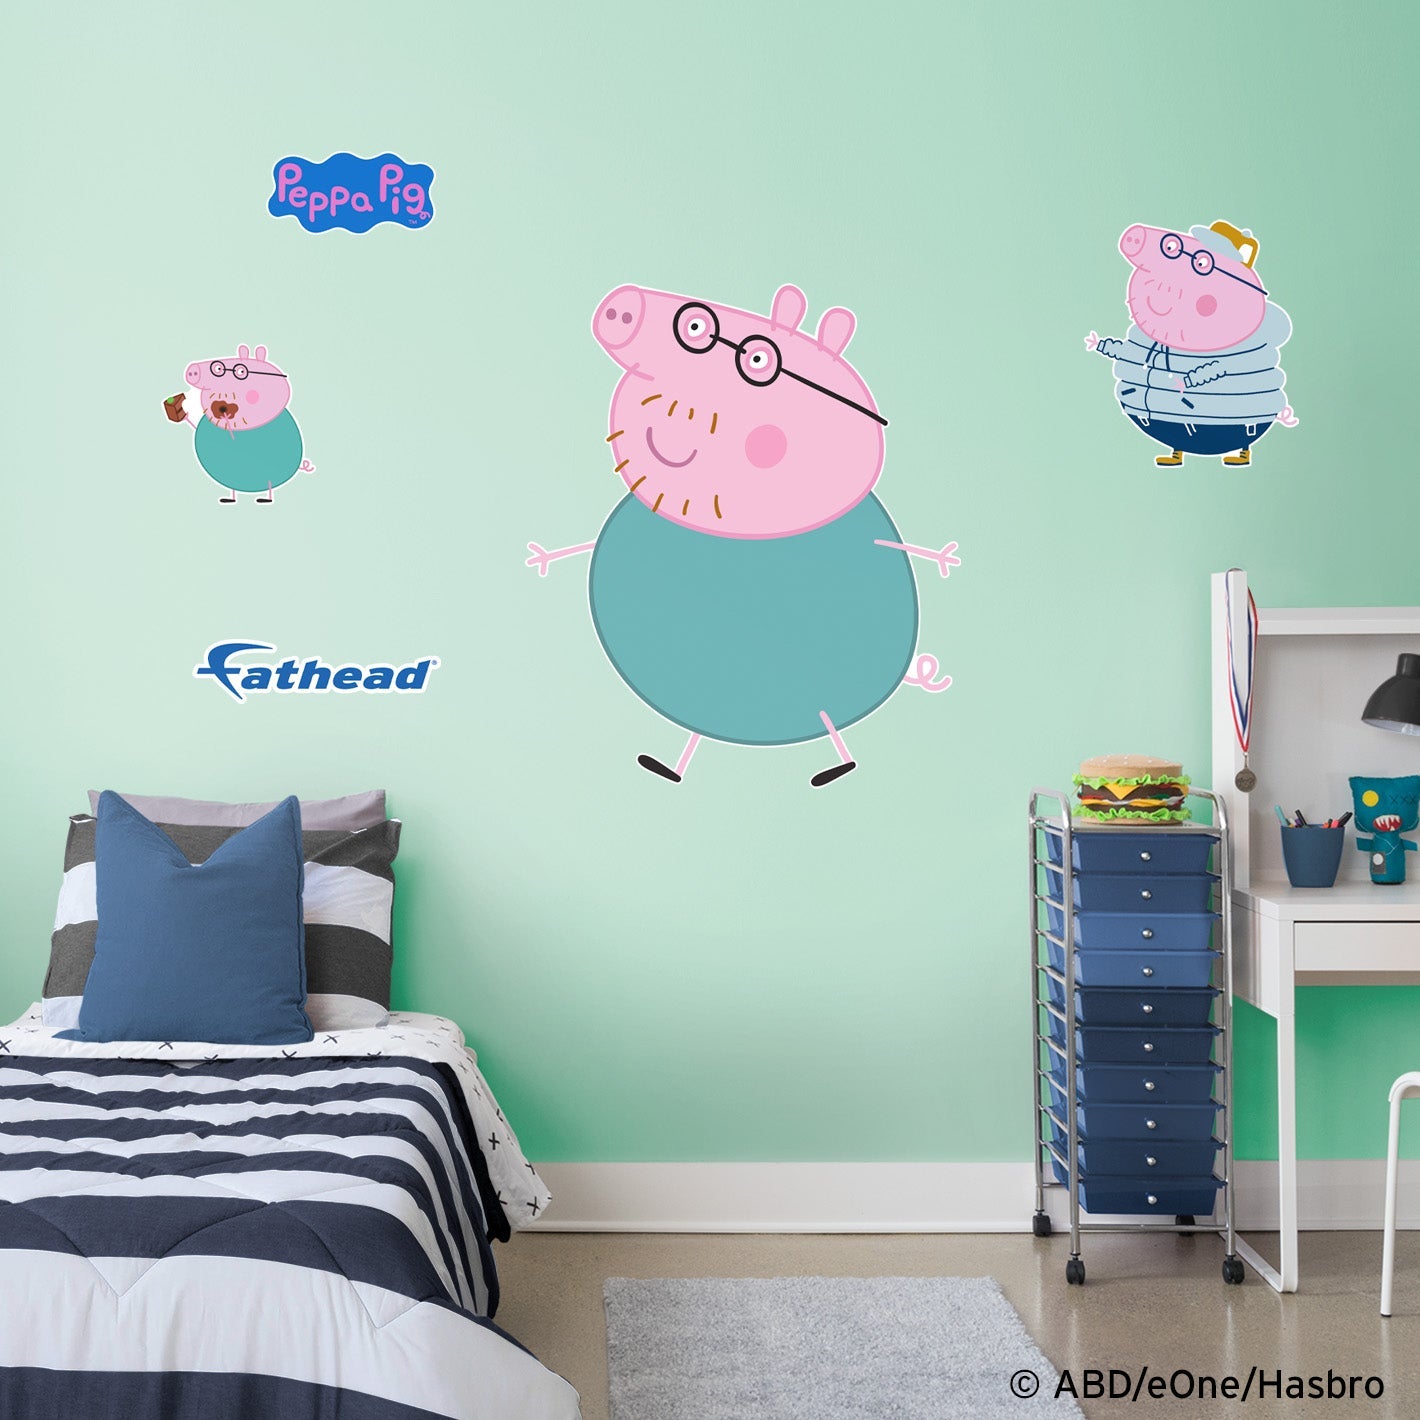 Peppa Pig: Daddy RealBigs - Officially Licensed Hasbro Removable Adhesive Decal